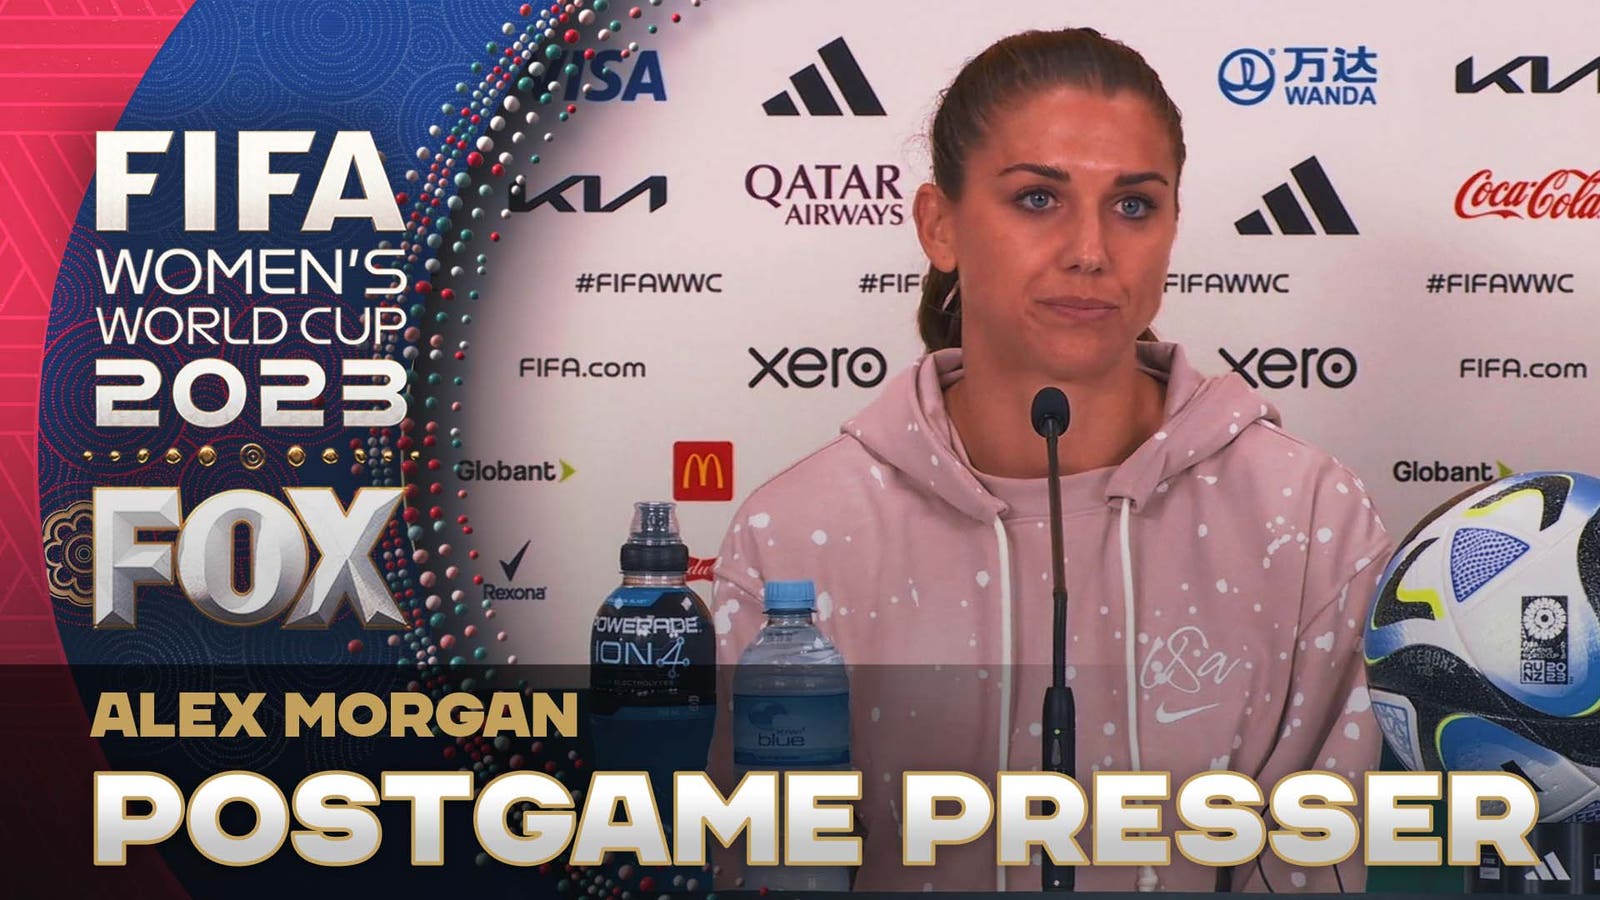 "We're not happy with the performance" — Alex Morgan on USWNT's draw vs. Portugal